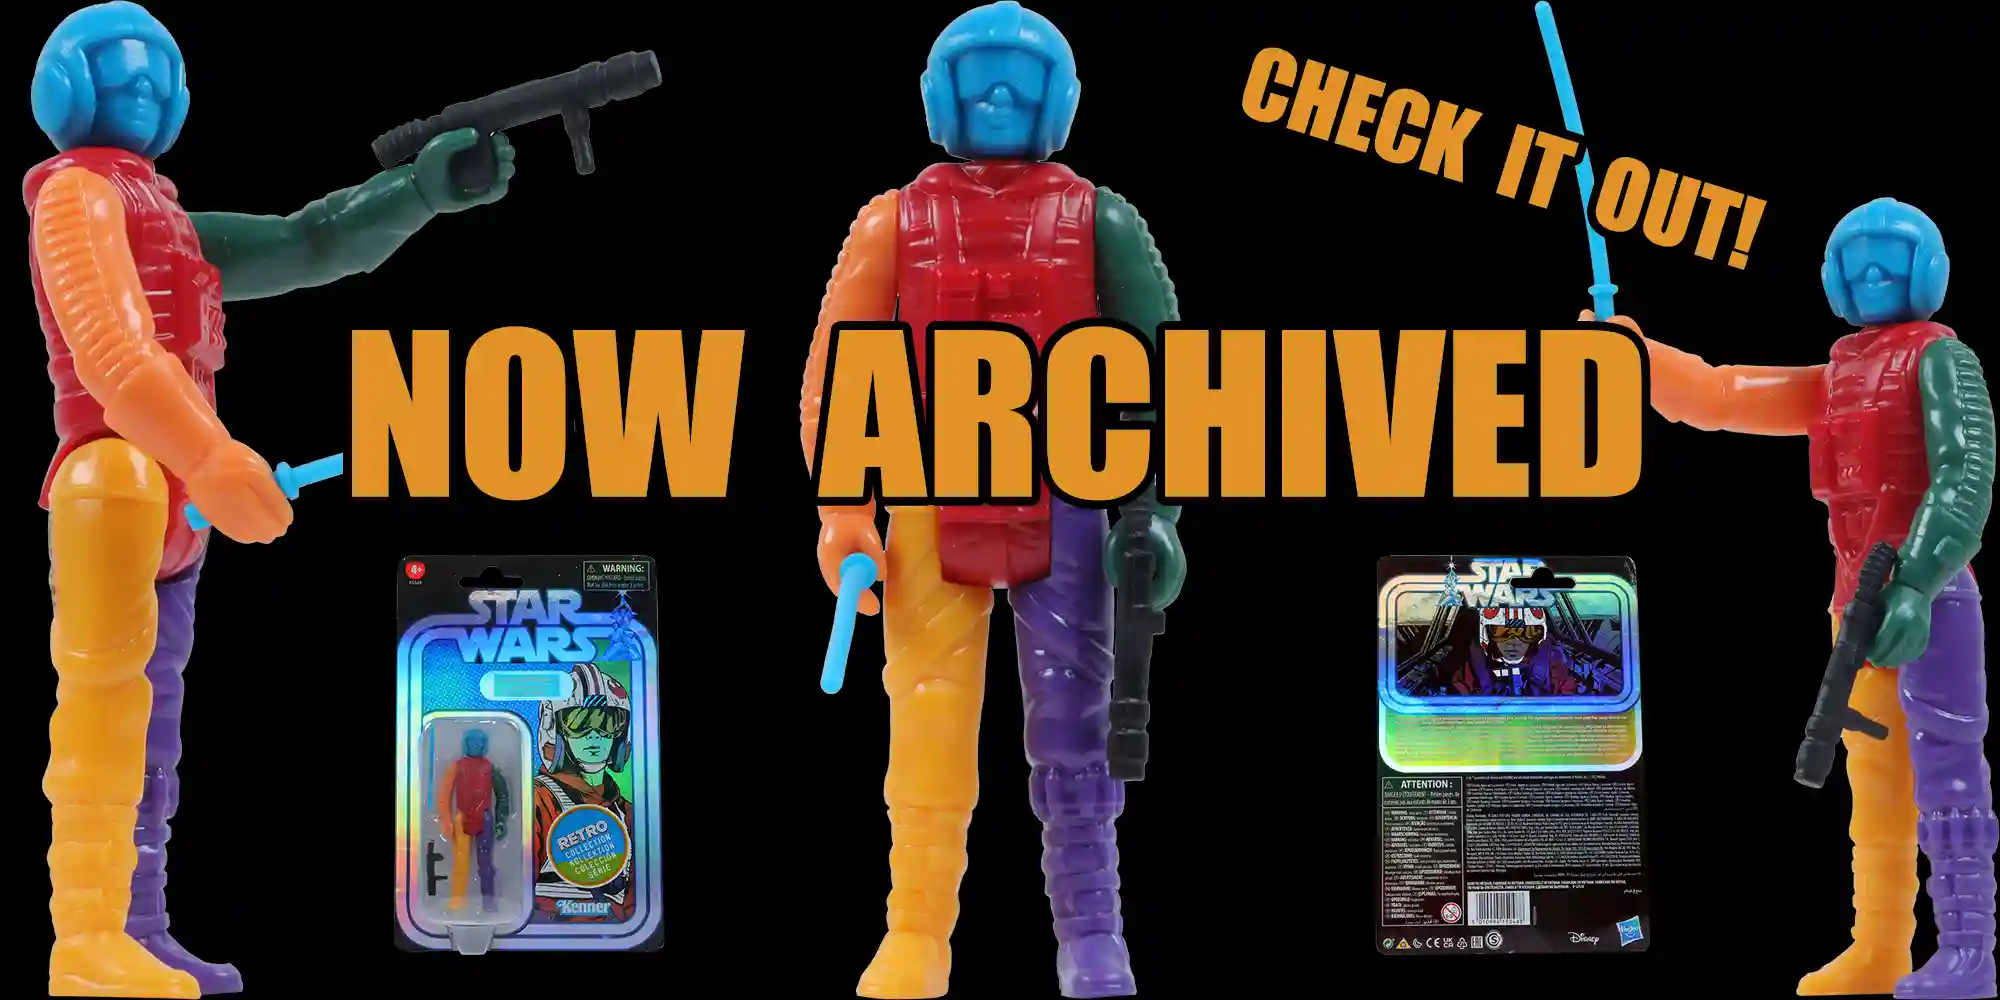 Newly Added: Retro Luke (Snowspeeder Prototype Edition) - Check It Out!